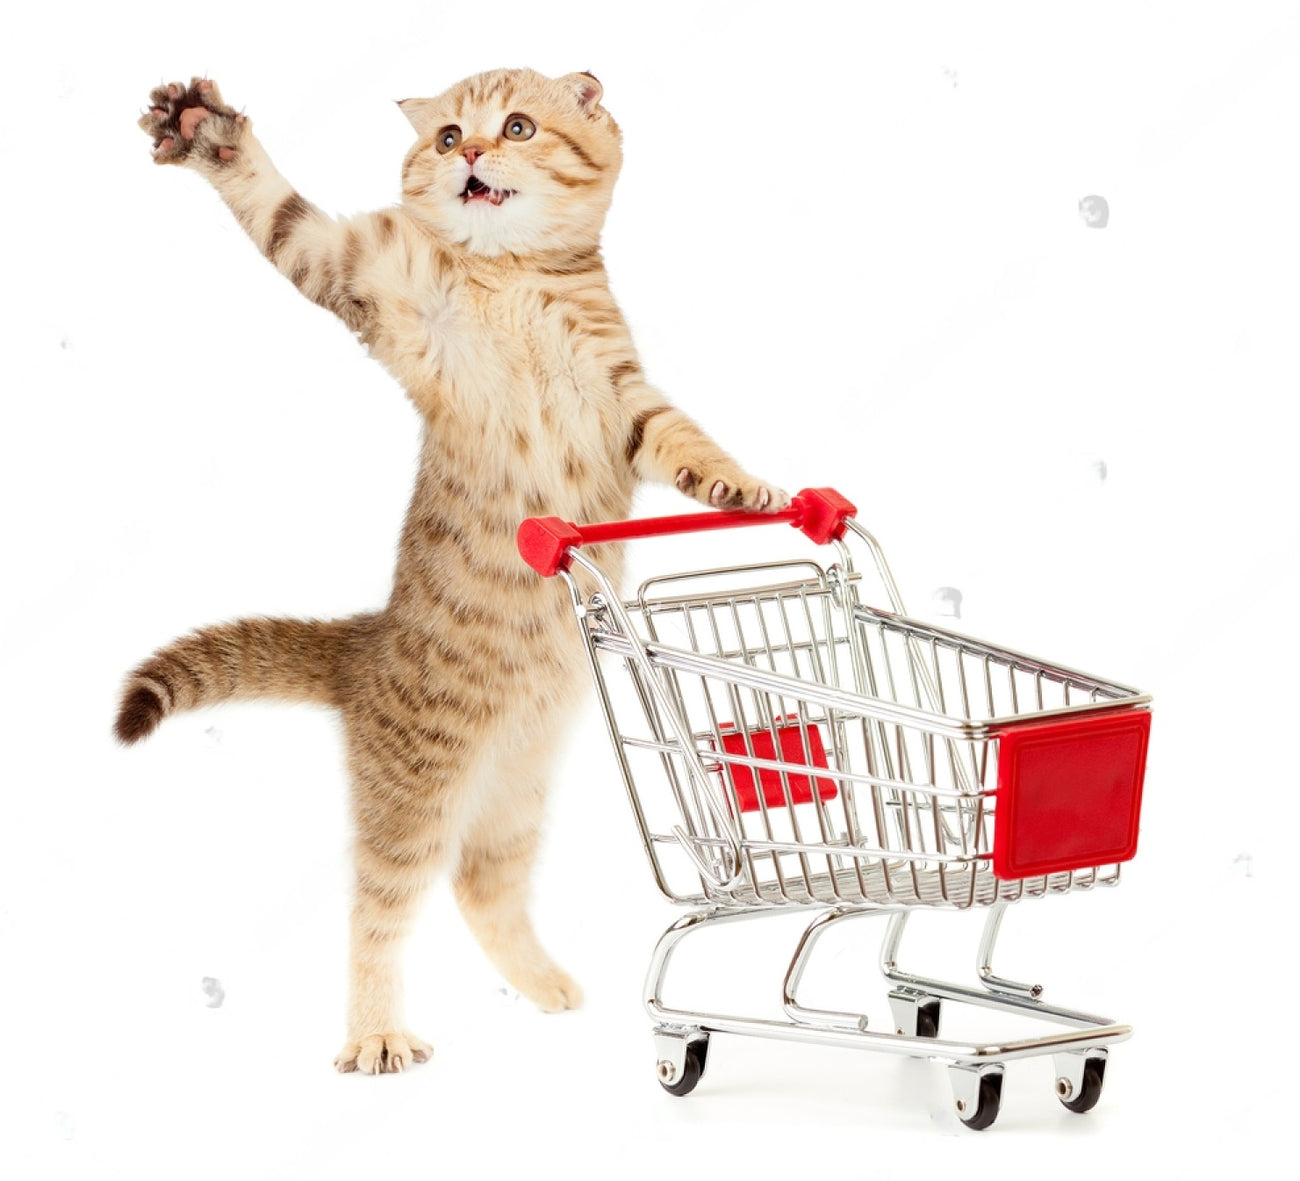 Shop for Cats